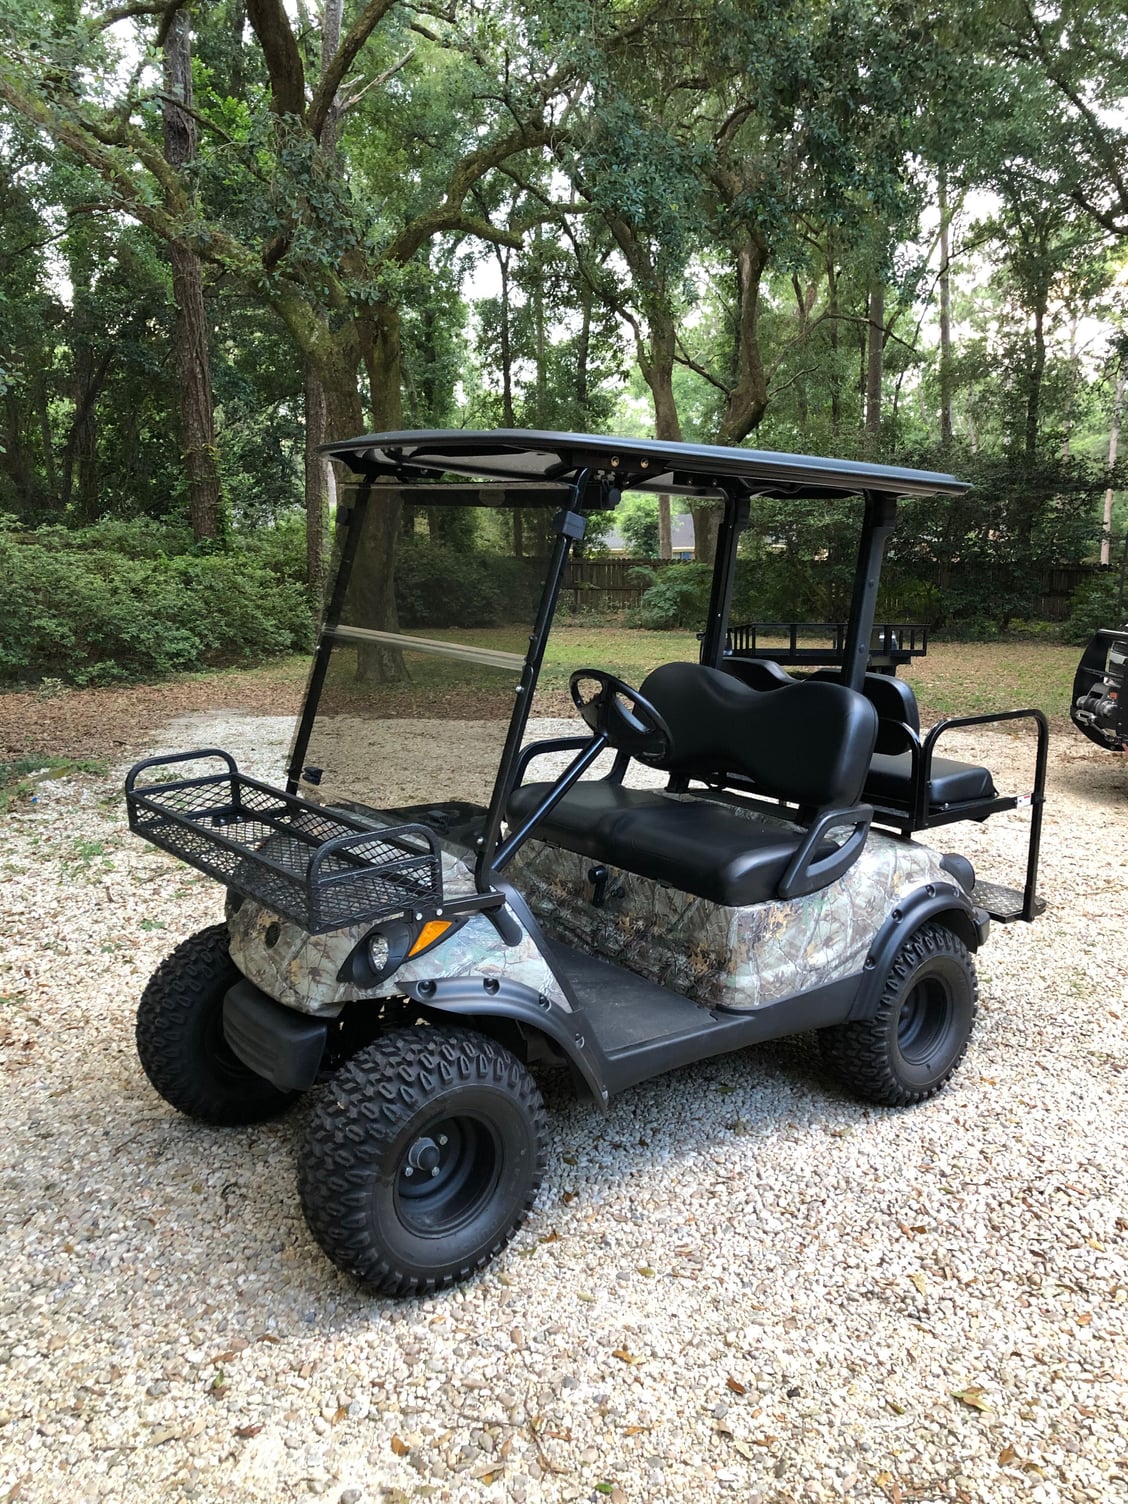 Yamaha golf cart gas $4600 - The Hull Truth - Boating and Fishing Forum